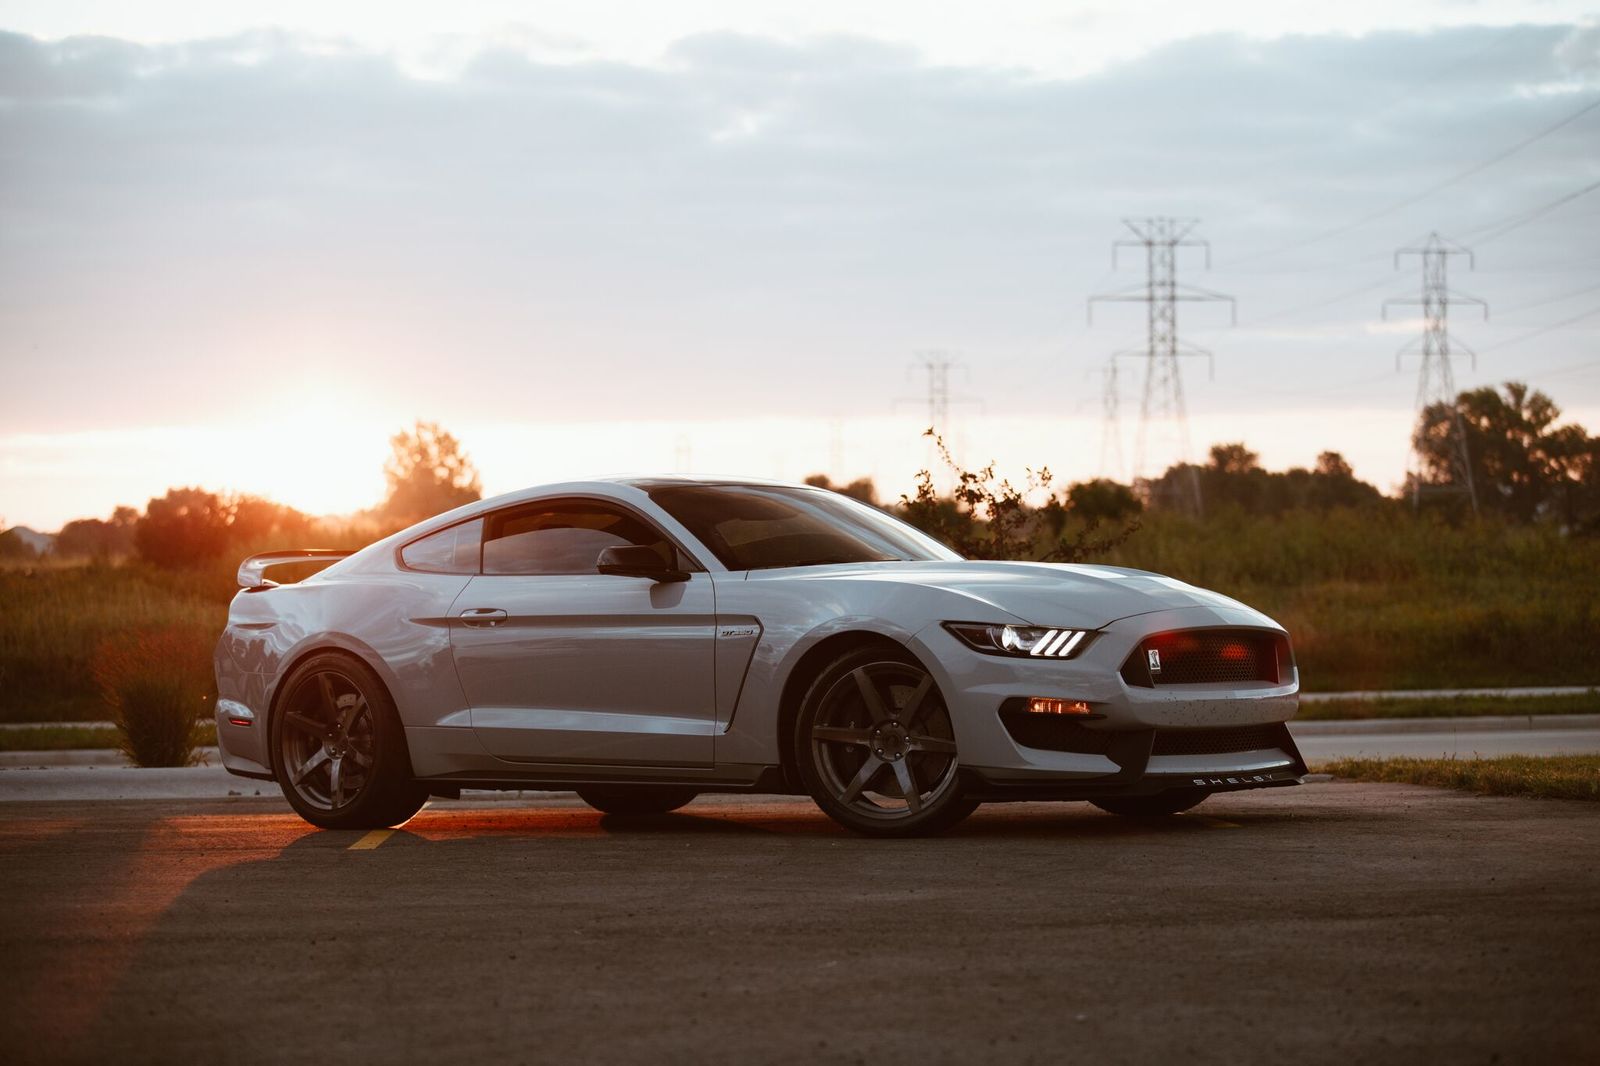 shelby-gt350-rsr-forged-r901-brushed-titanium-monoblock-concave-wheels.jpg